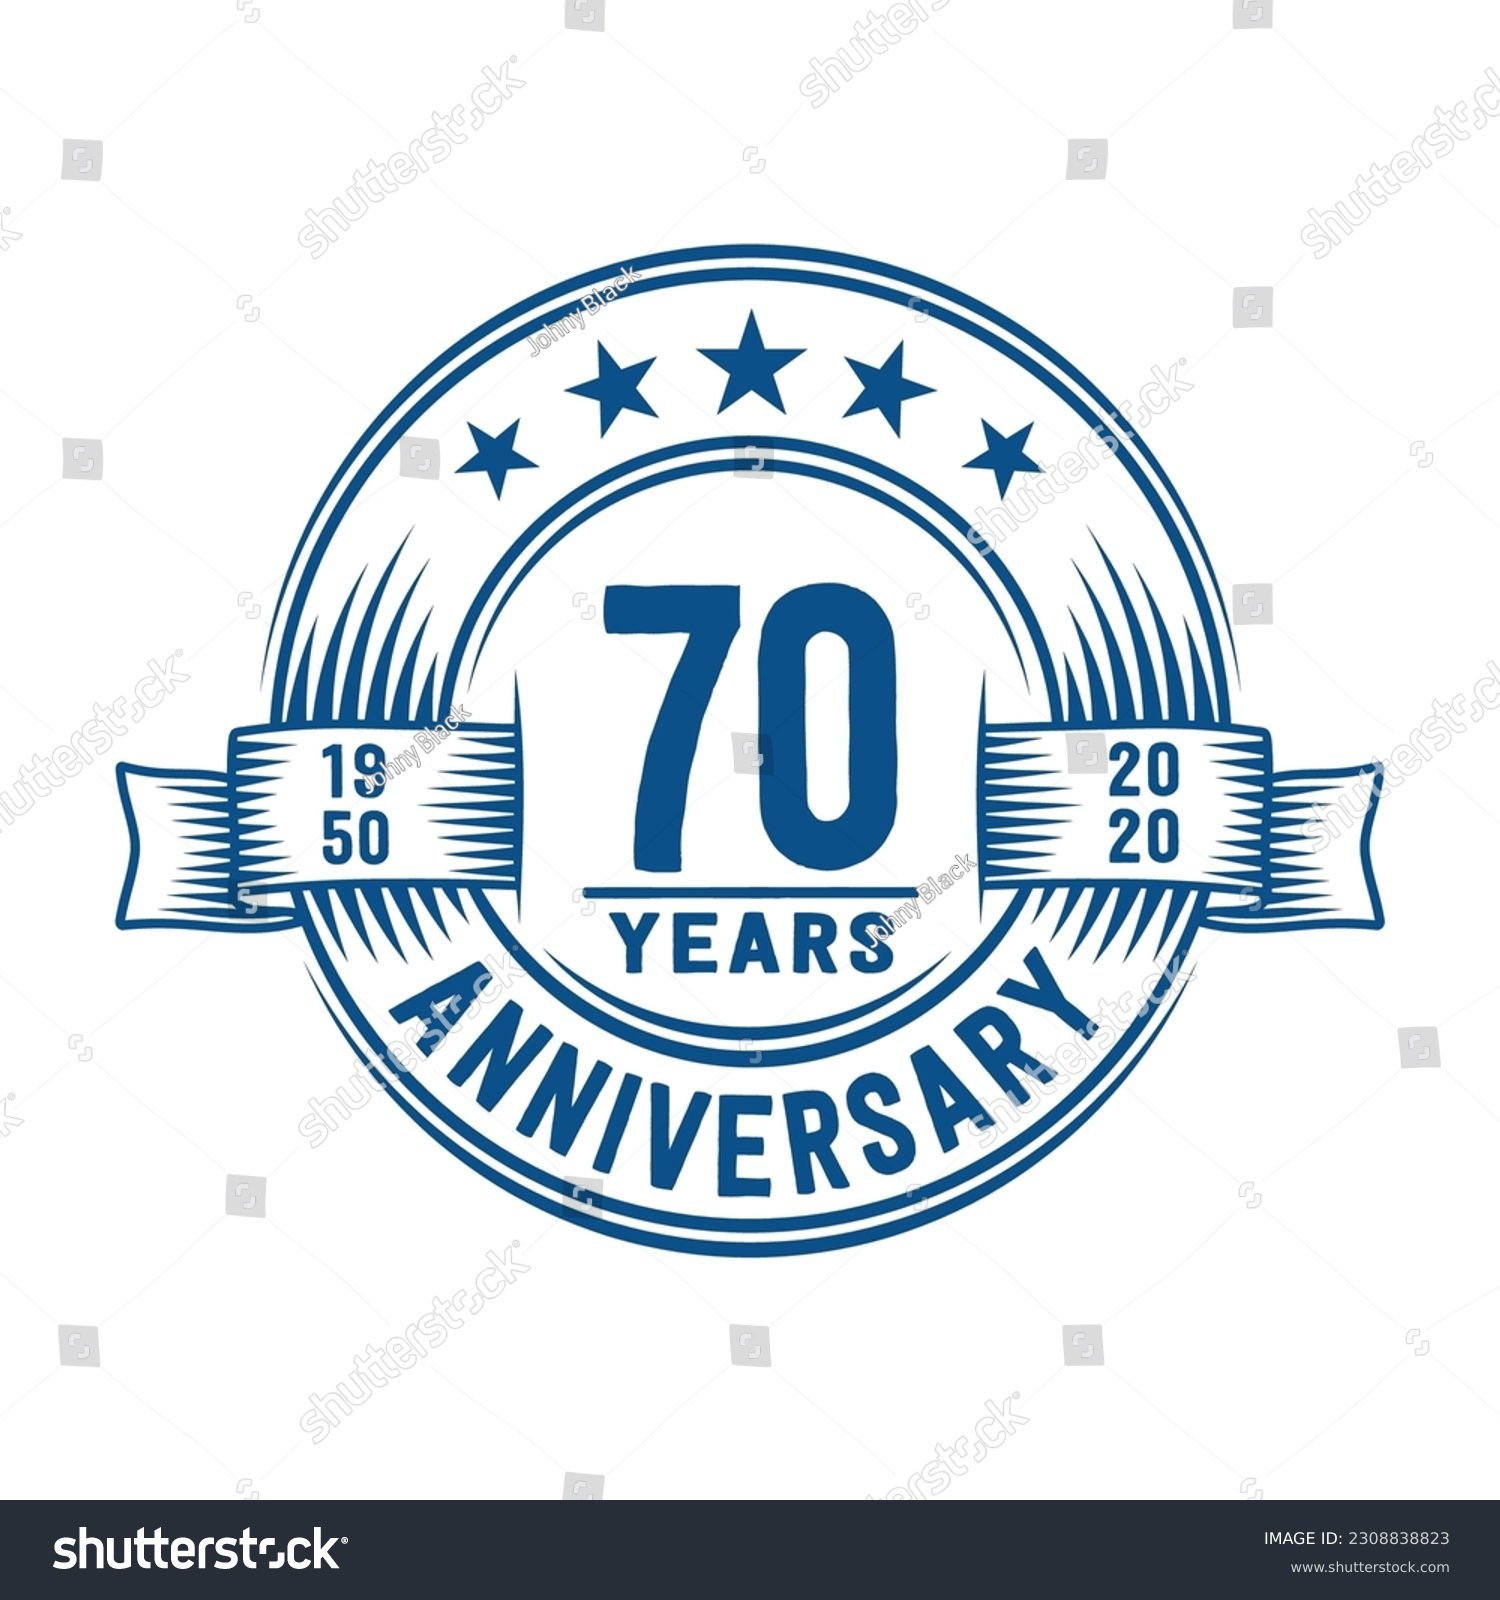 SVG of 70 years logo design template. 70th anniversary vector and illustration. svg